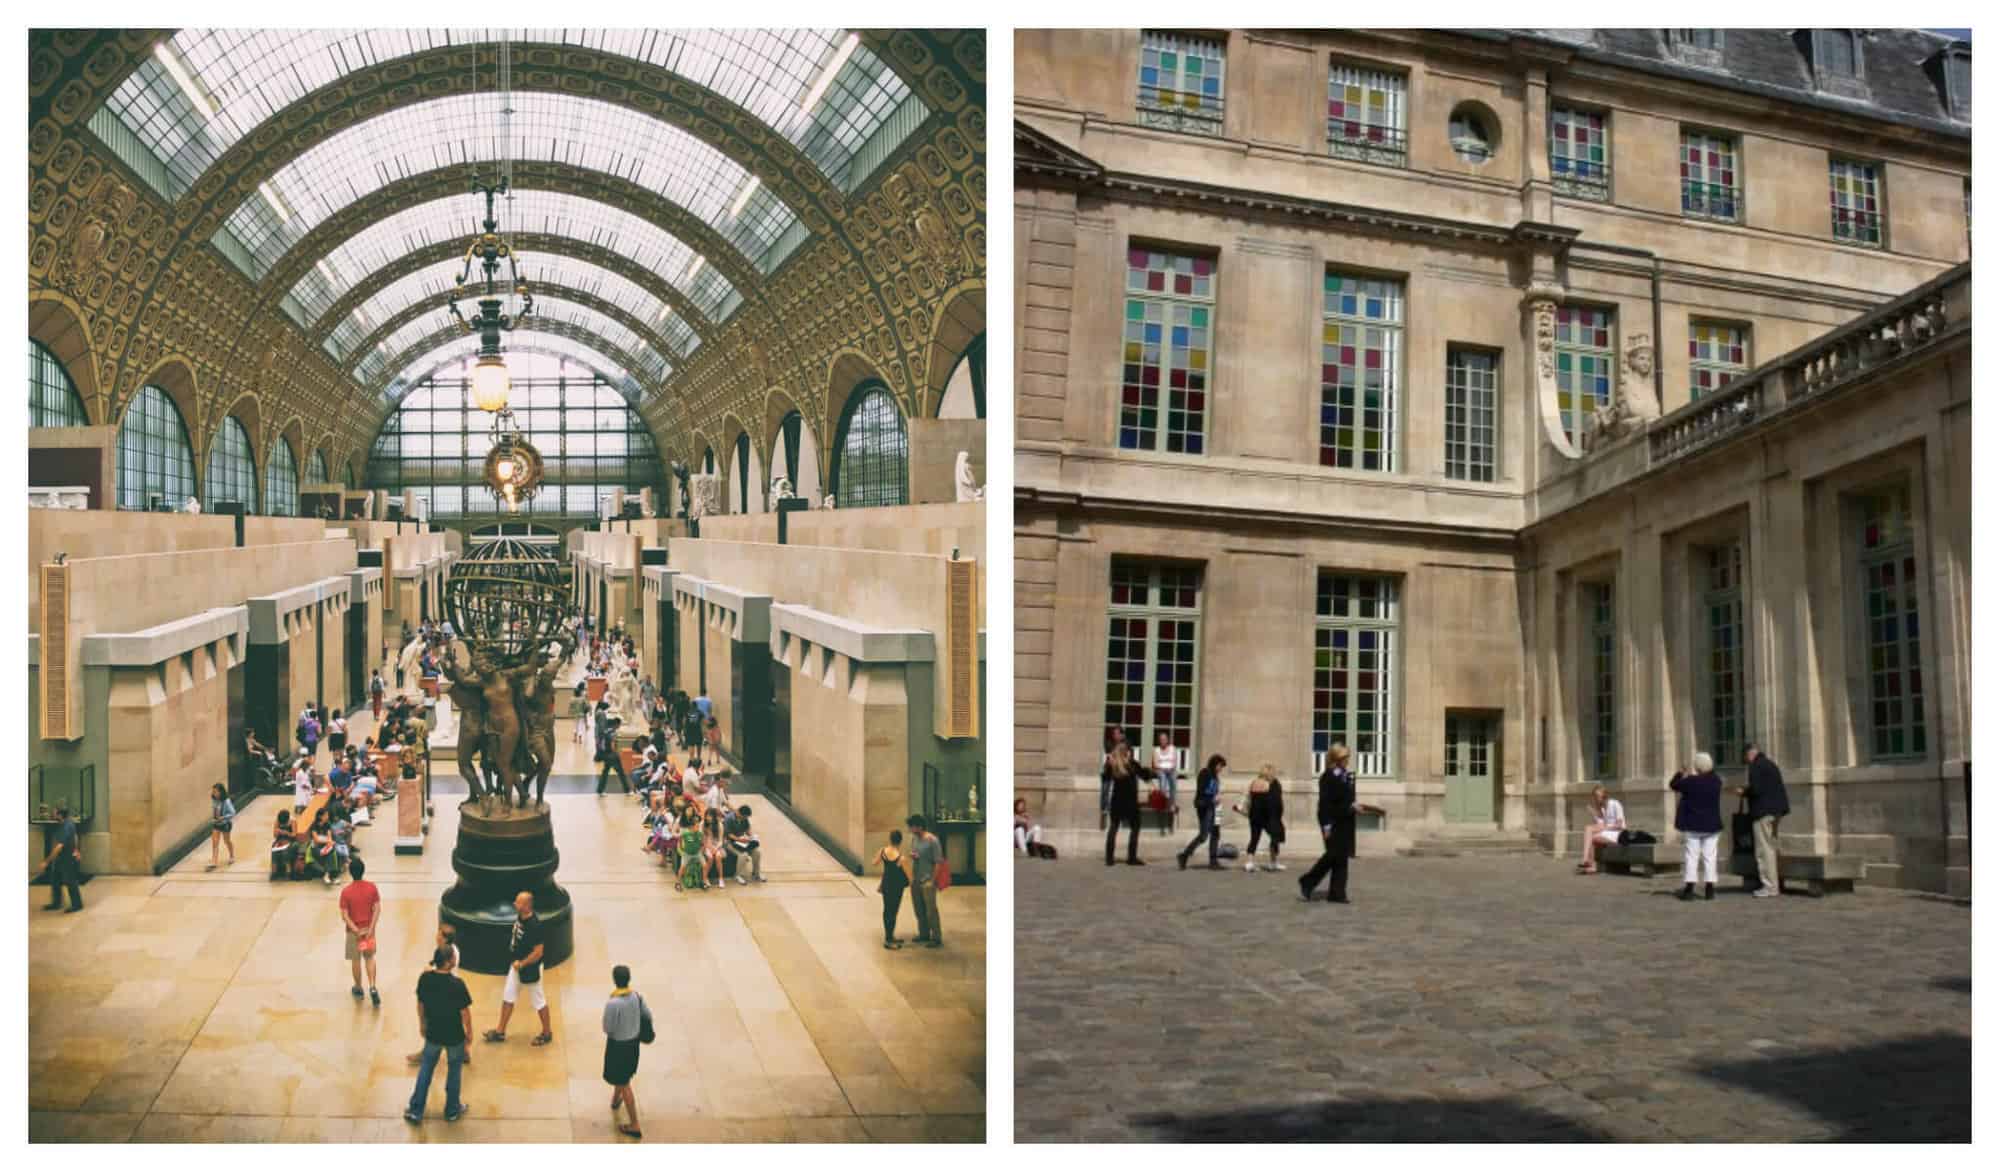 left: the lobby of Musée d'Orsay; right: the exterior of the Musée Picasso.